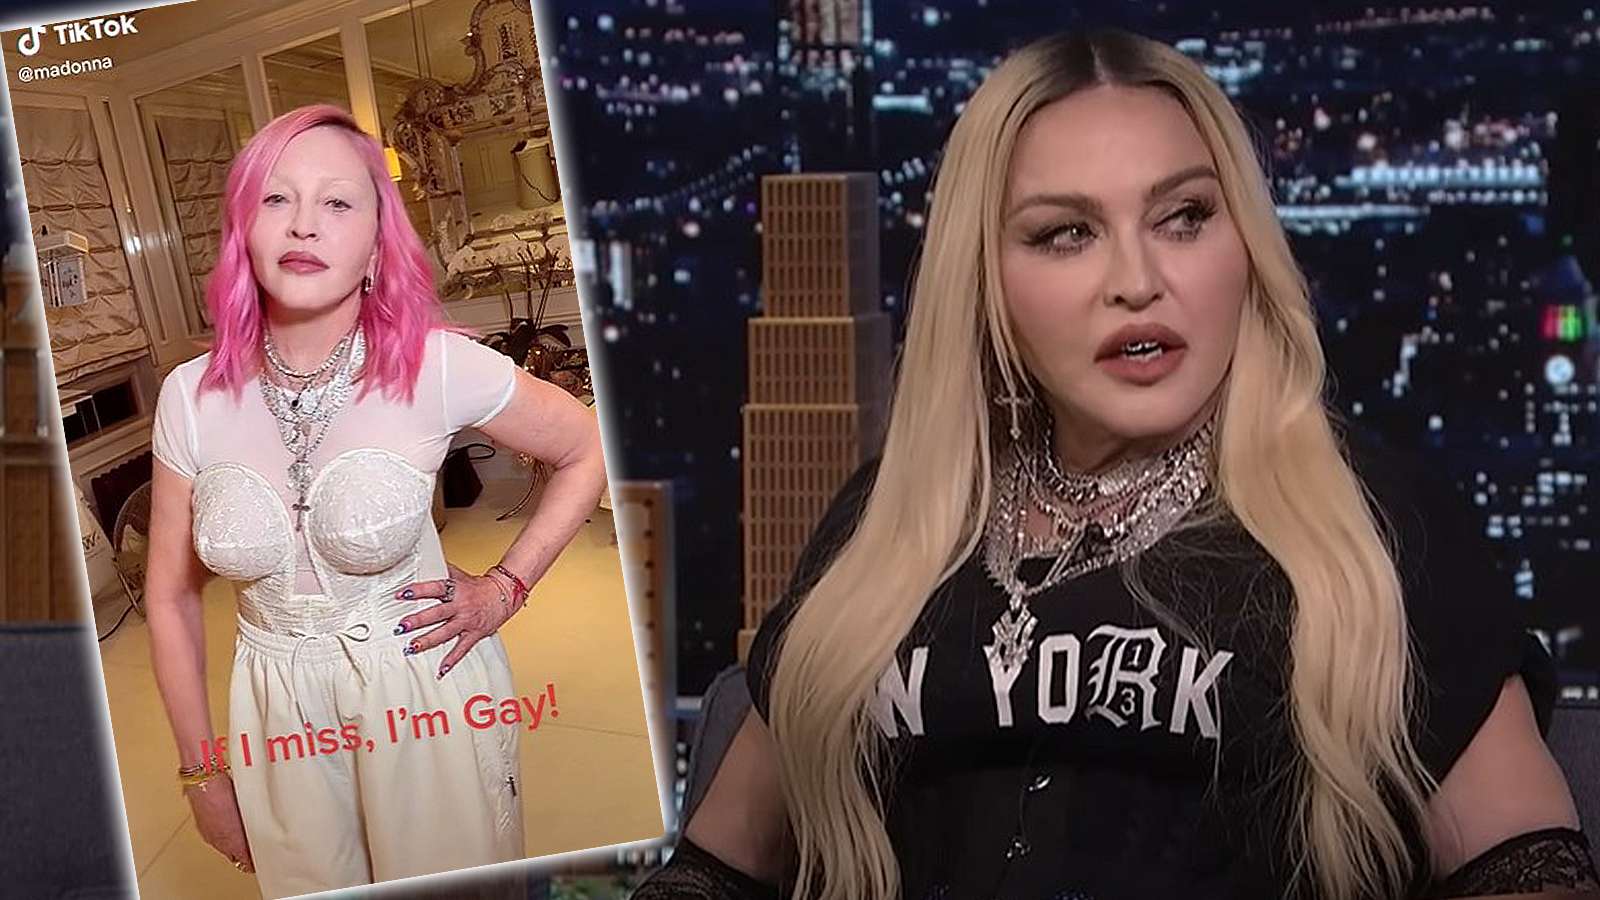 Did madonna come out in viral tiktok video